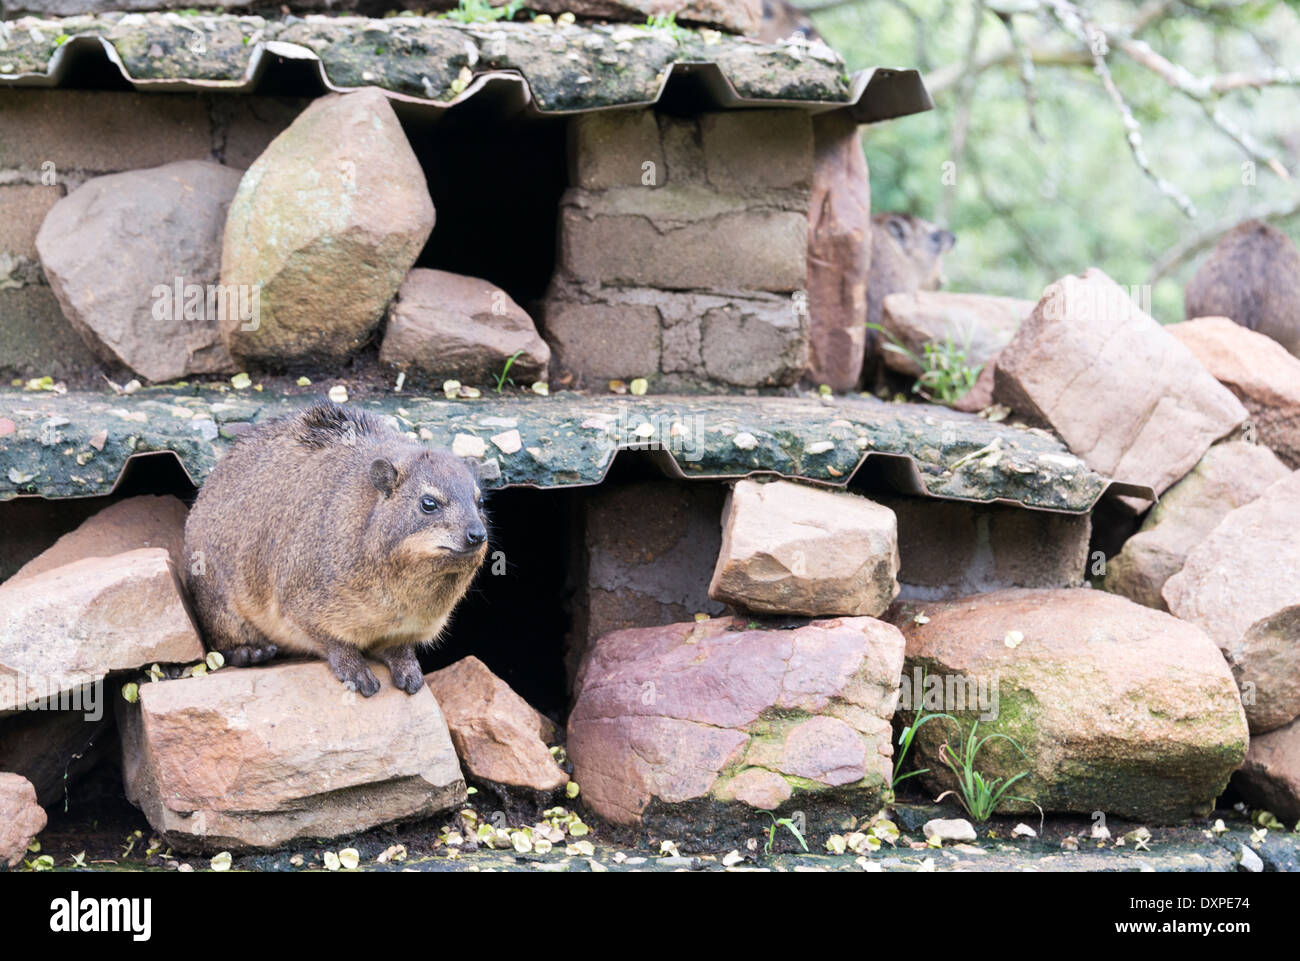 A Rock Hyrax, otherwise known as a Cape Hyrax and a Dassie, sitting on rocks in South Africa Stock Photo